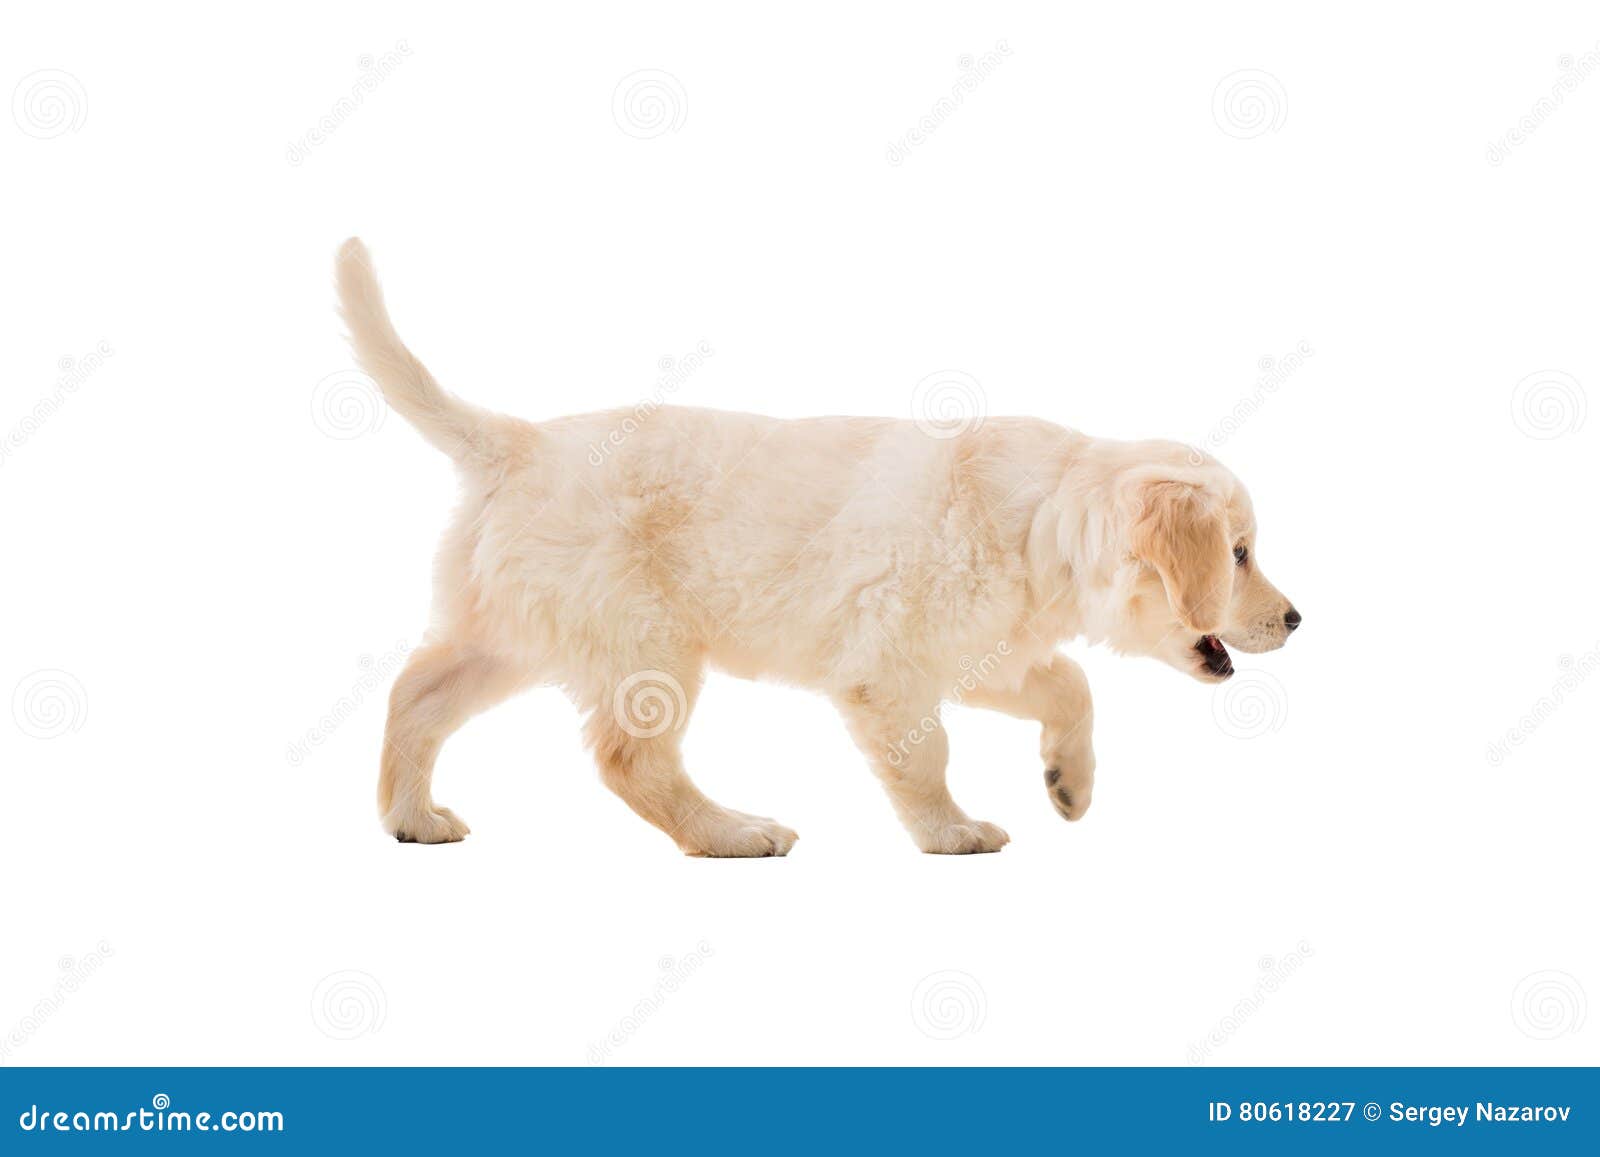 Puppy Golden Retriever On A White Background Stock Image Image Of Animal Lays 80618227